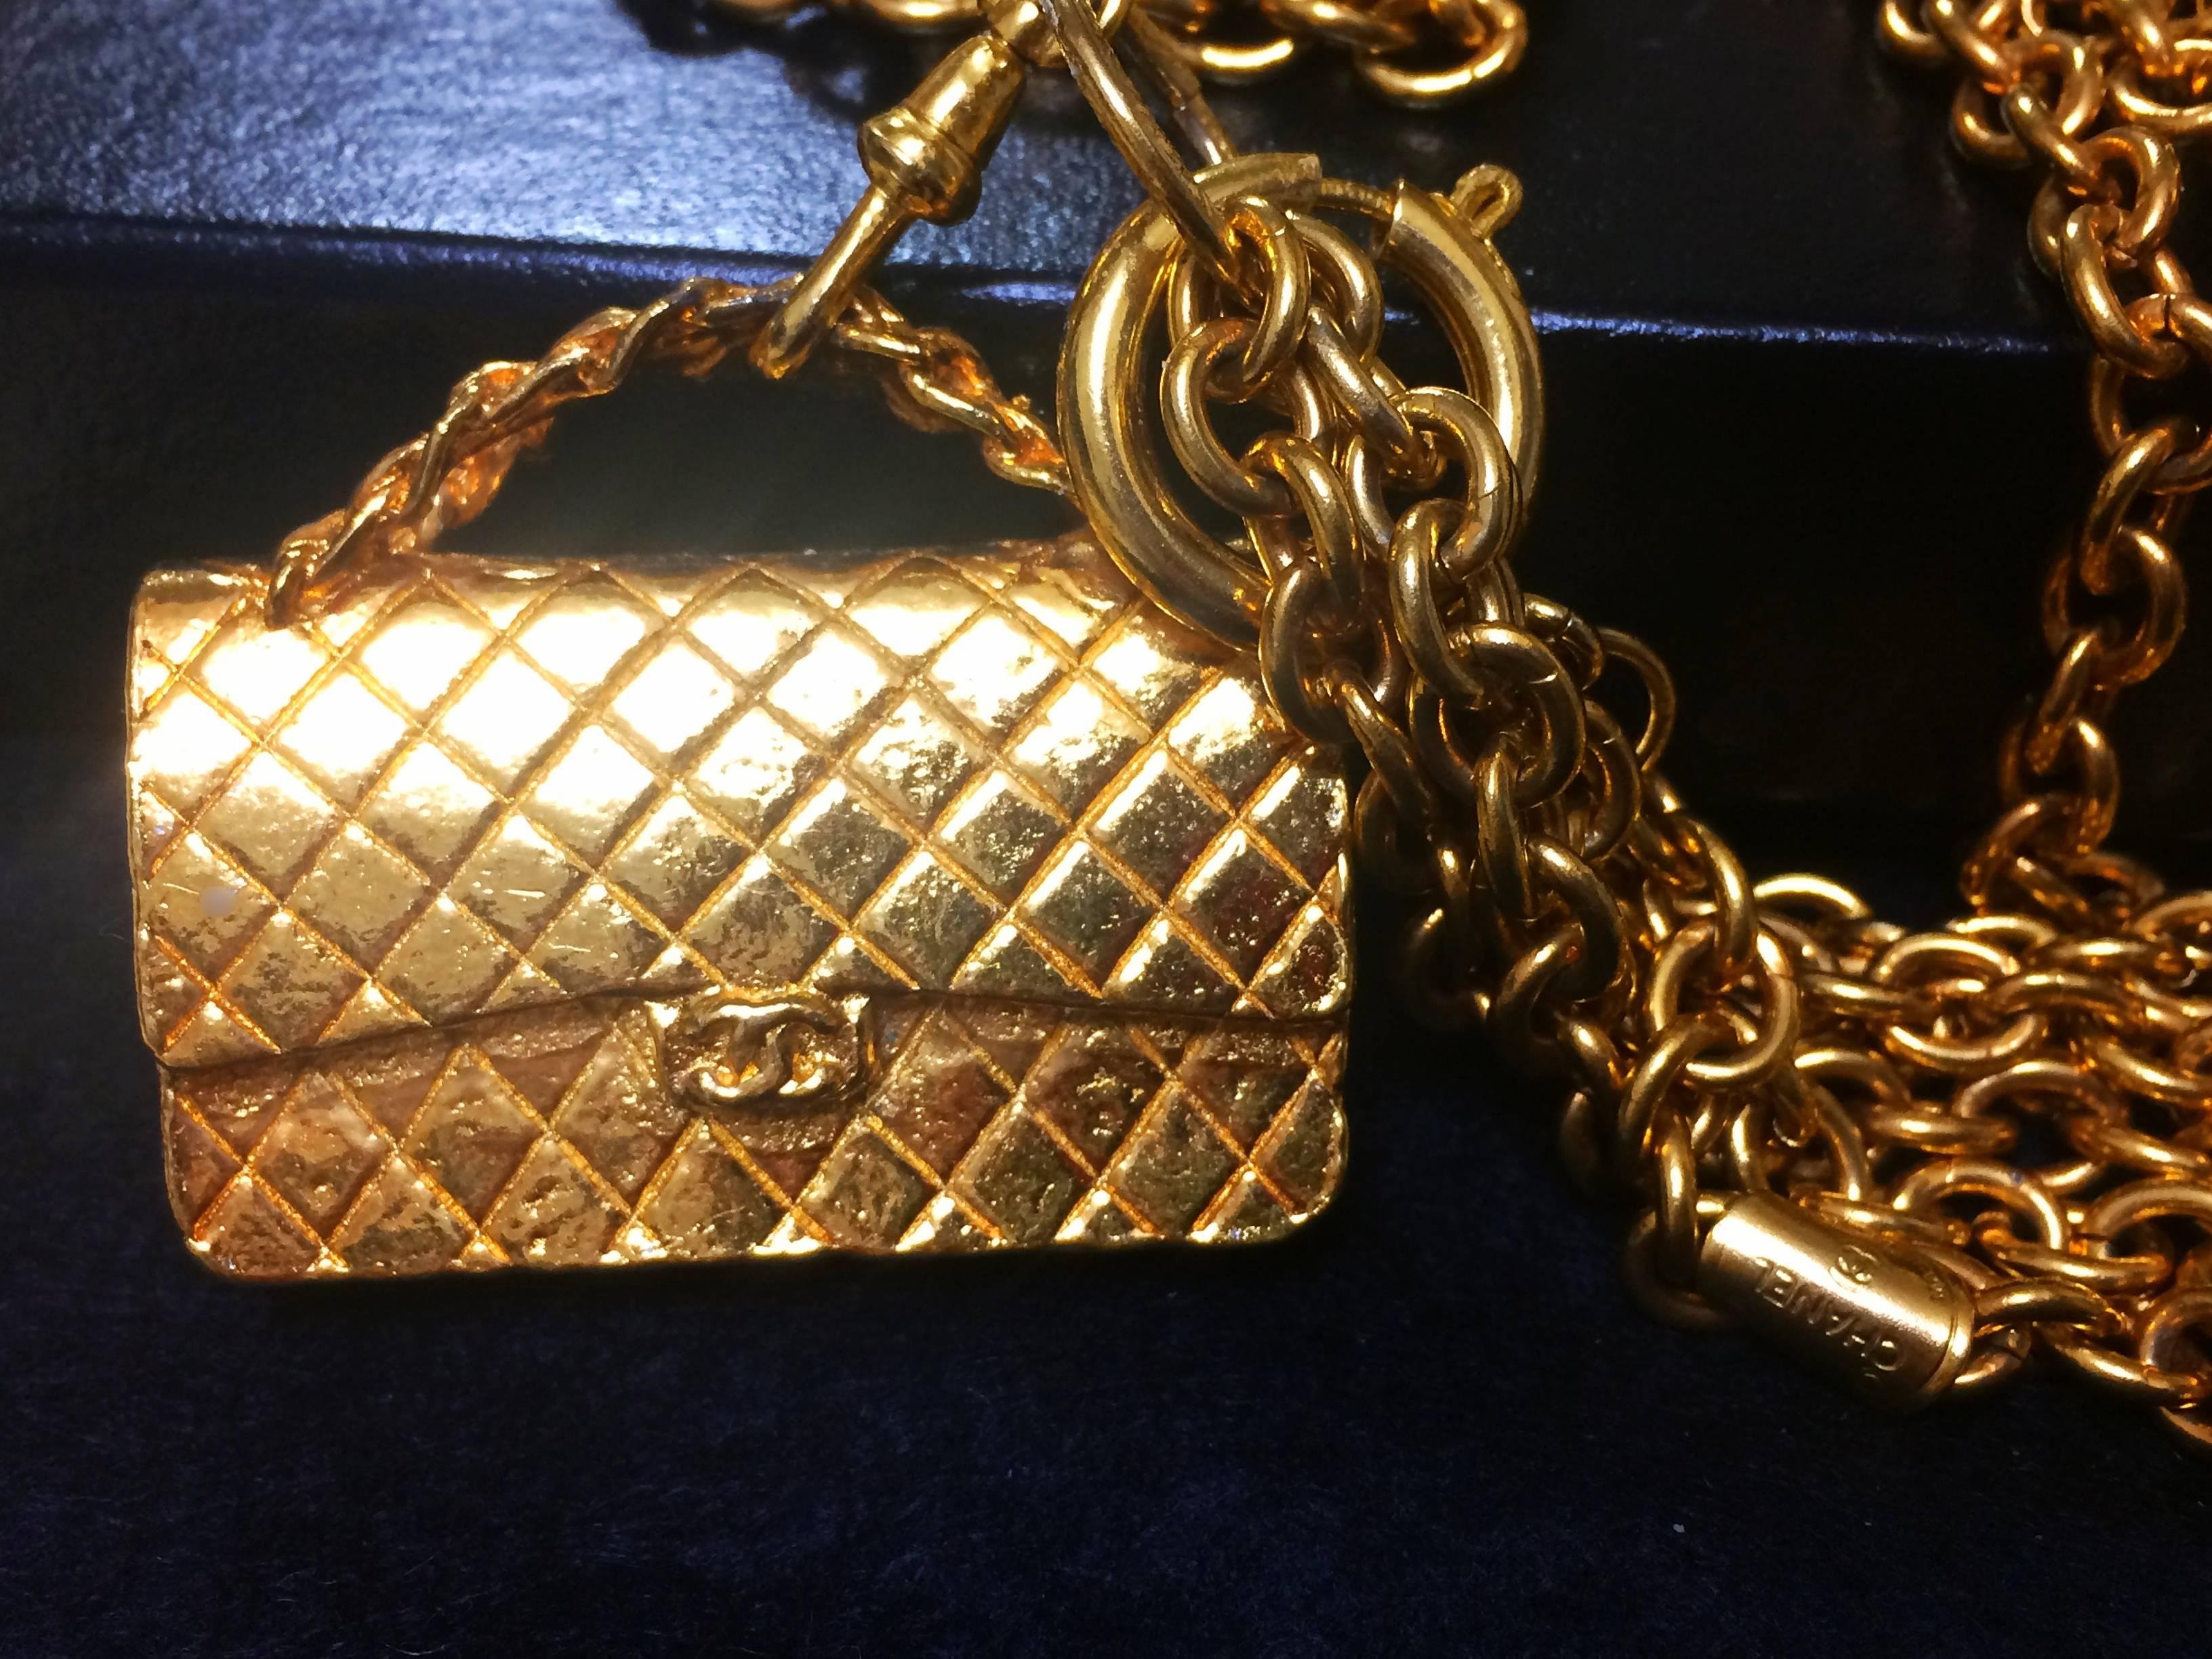 Women's Vintage CHANEL golden double chain long necklace with classic 2.55 bag charm.